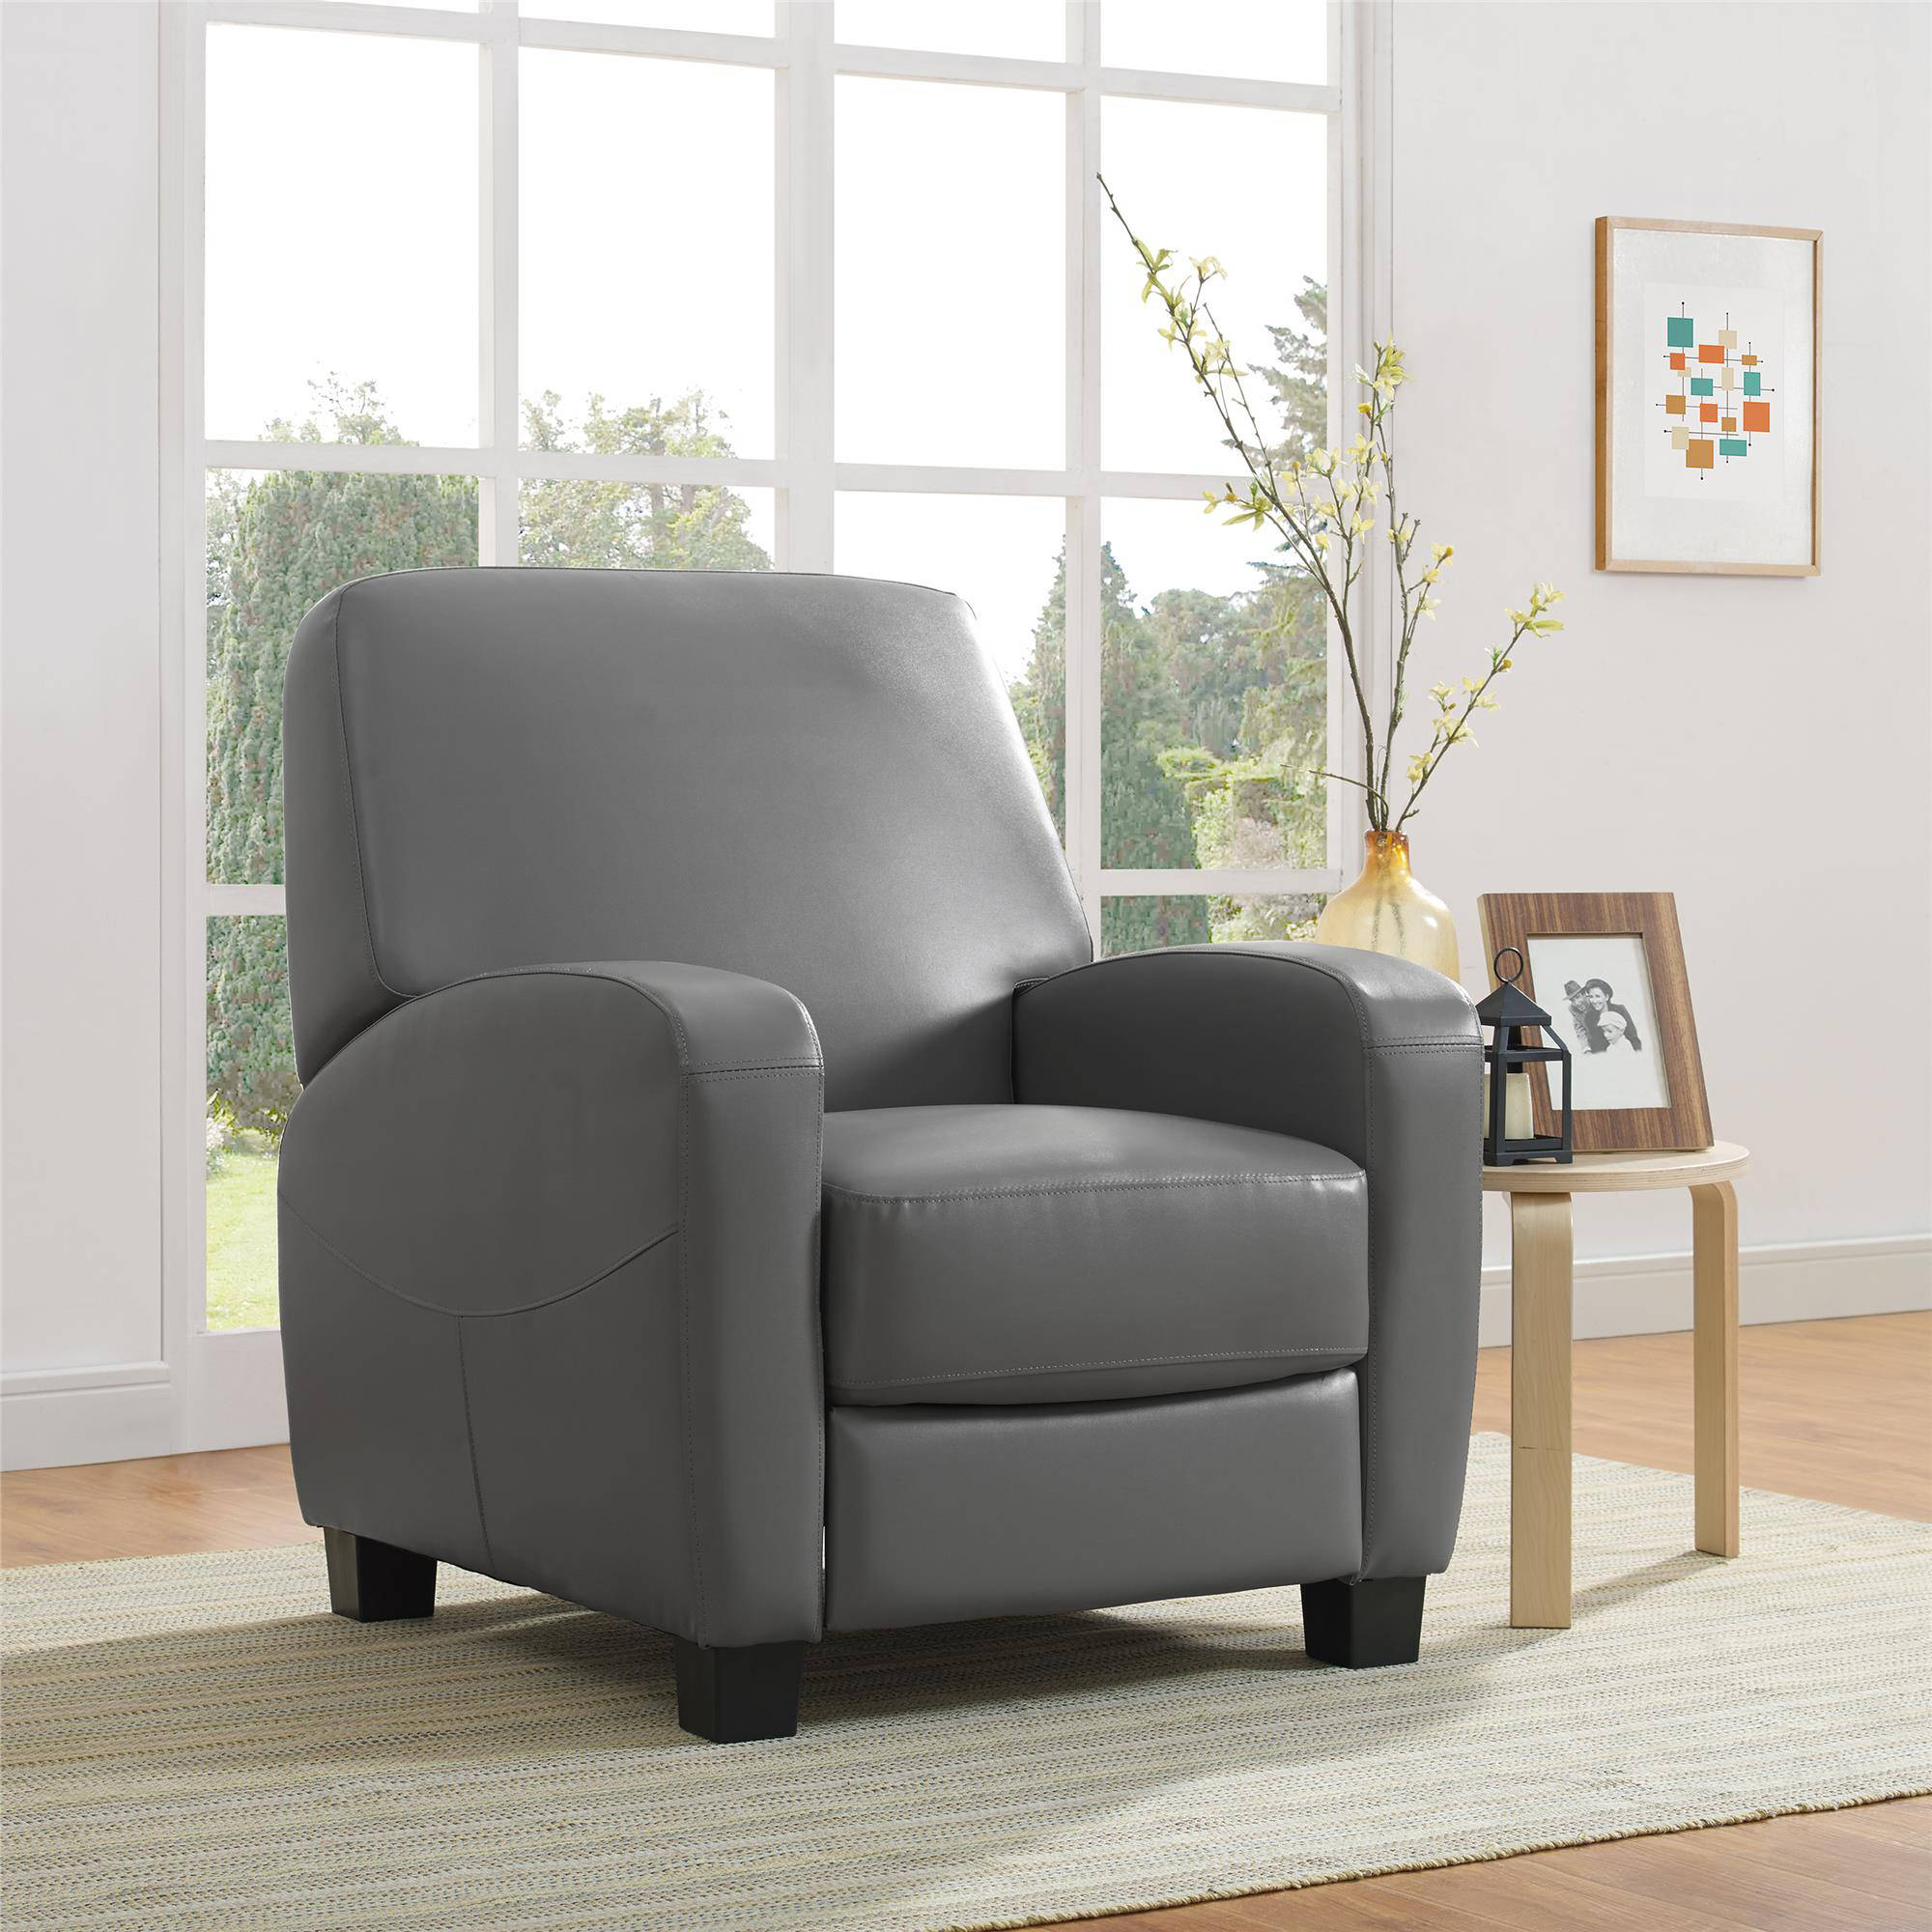 Mainstays Home Theater Recliner with Foam Padding